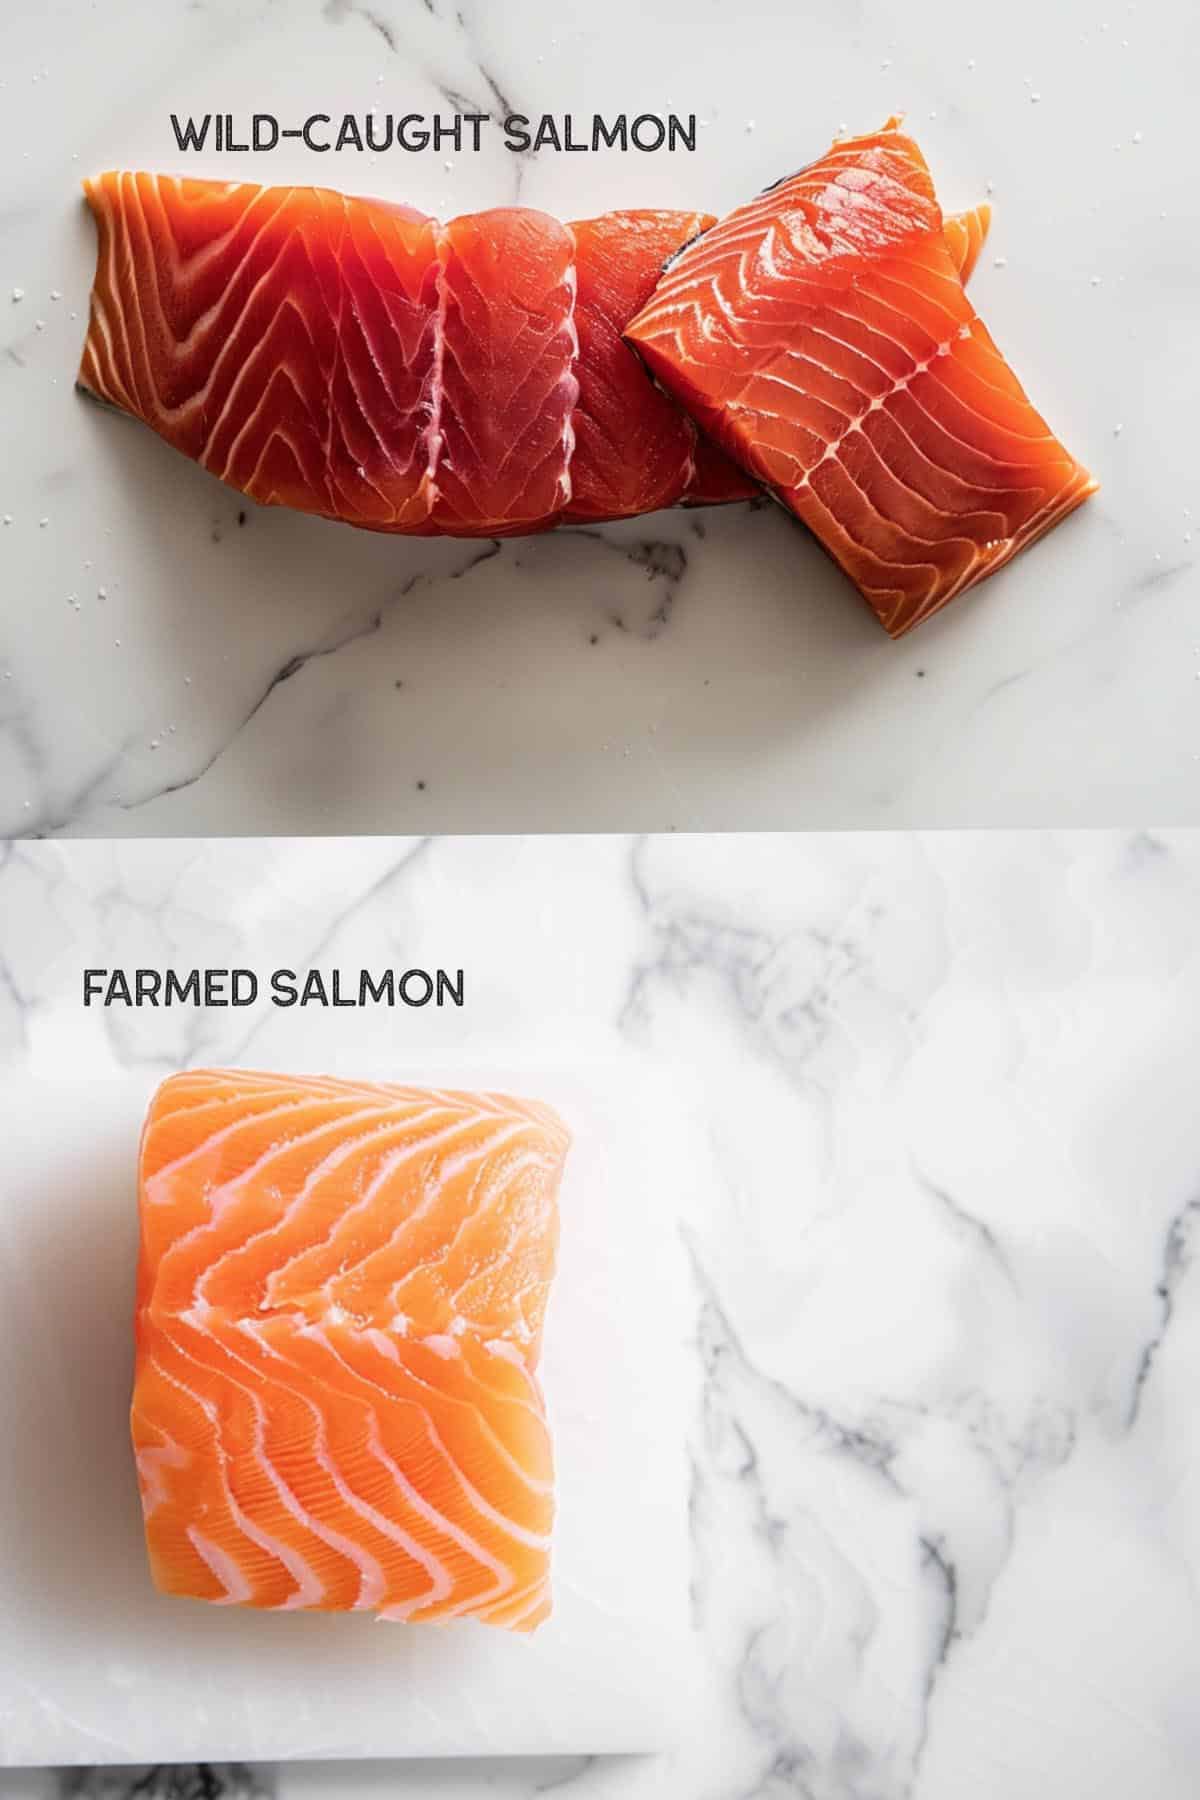 Side-by-side comparison of wild-caught and farmed salmon fillets, highlighting color differences